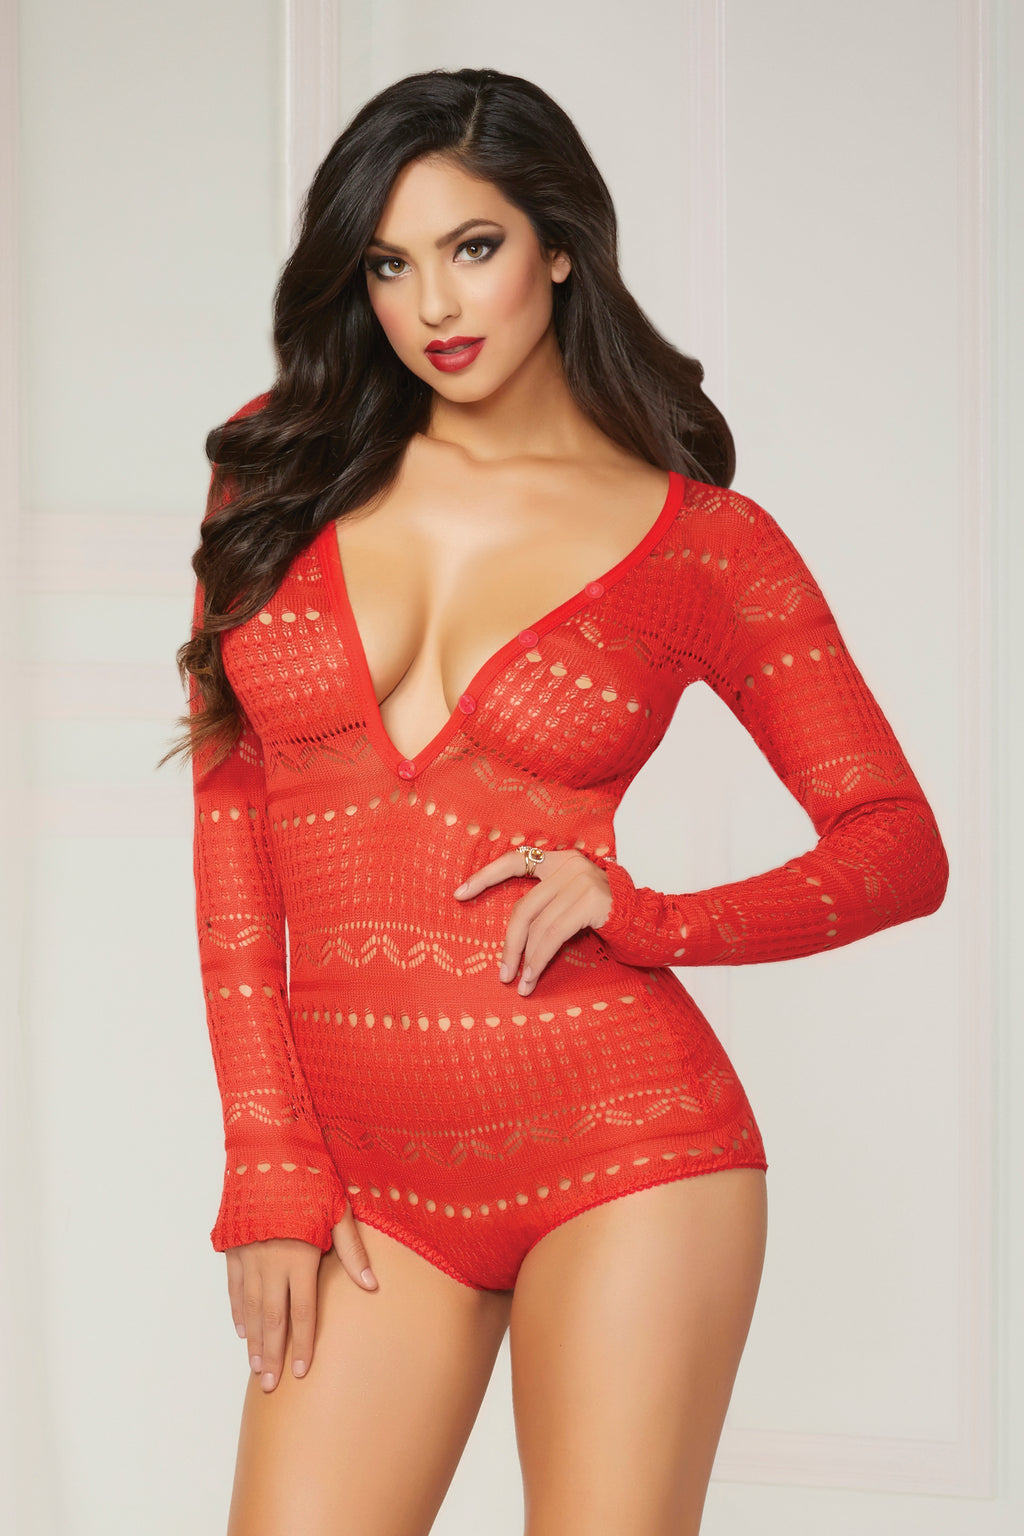 Knit Long Sleeve Romper  - Small  - Red STM-10721-REDS